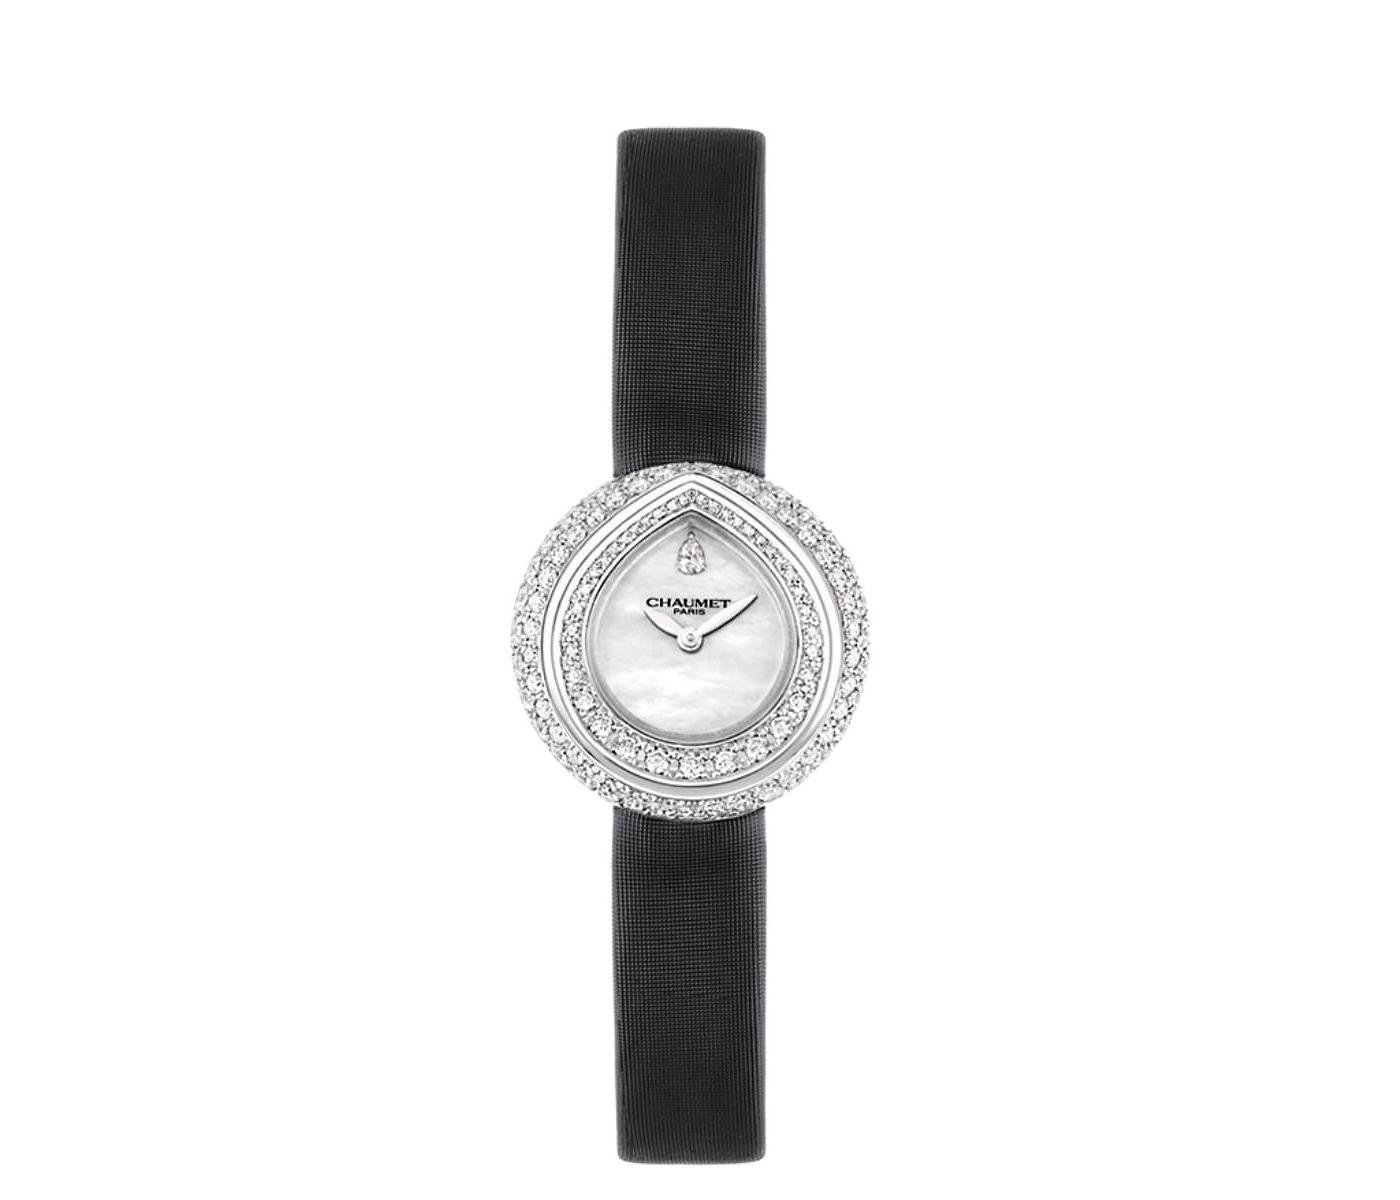 Watch by Chaumet